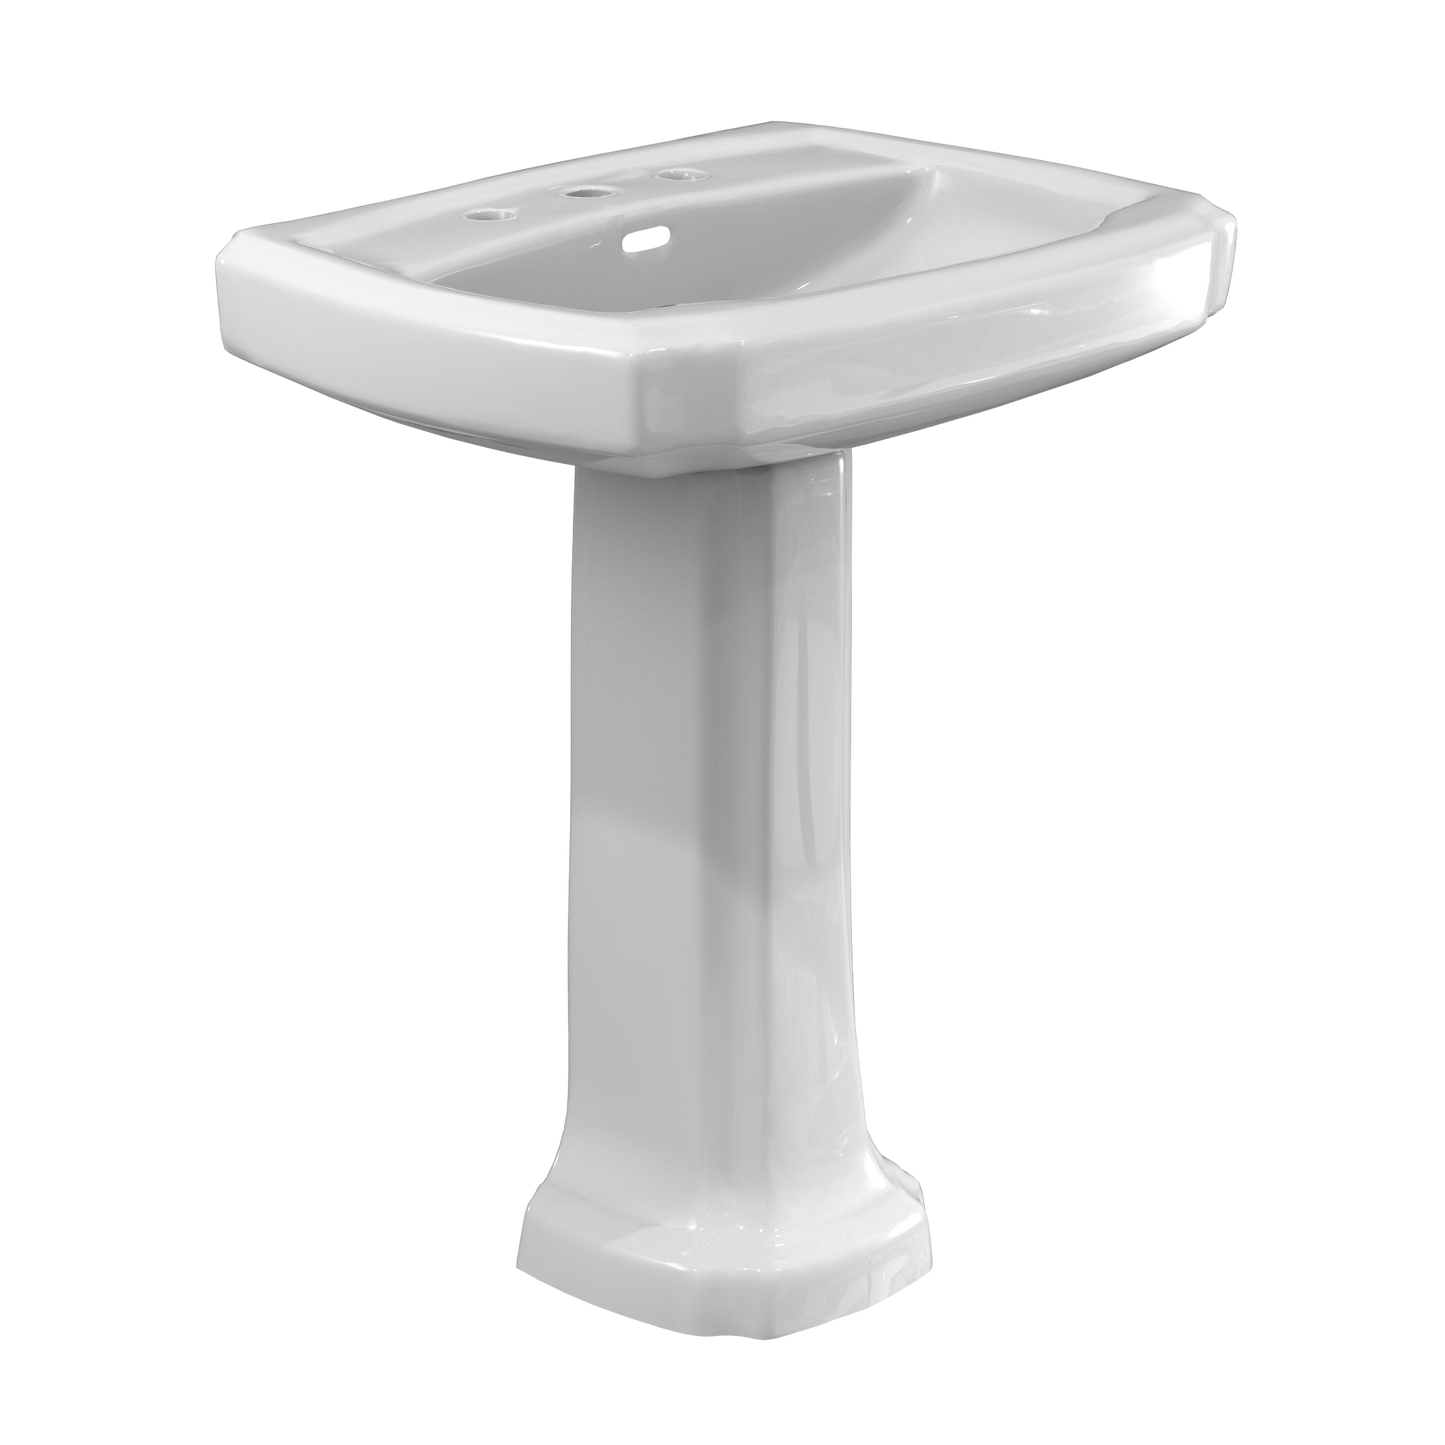 TOTO® Guinevere® 27-1/8" x 19-7/8" Rectangular Pedestal Bathroom Sink for 8 Inch Center Faucets, Cotton White - LPT970.8#01